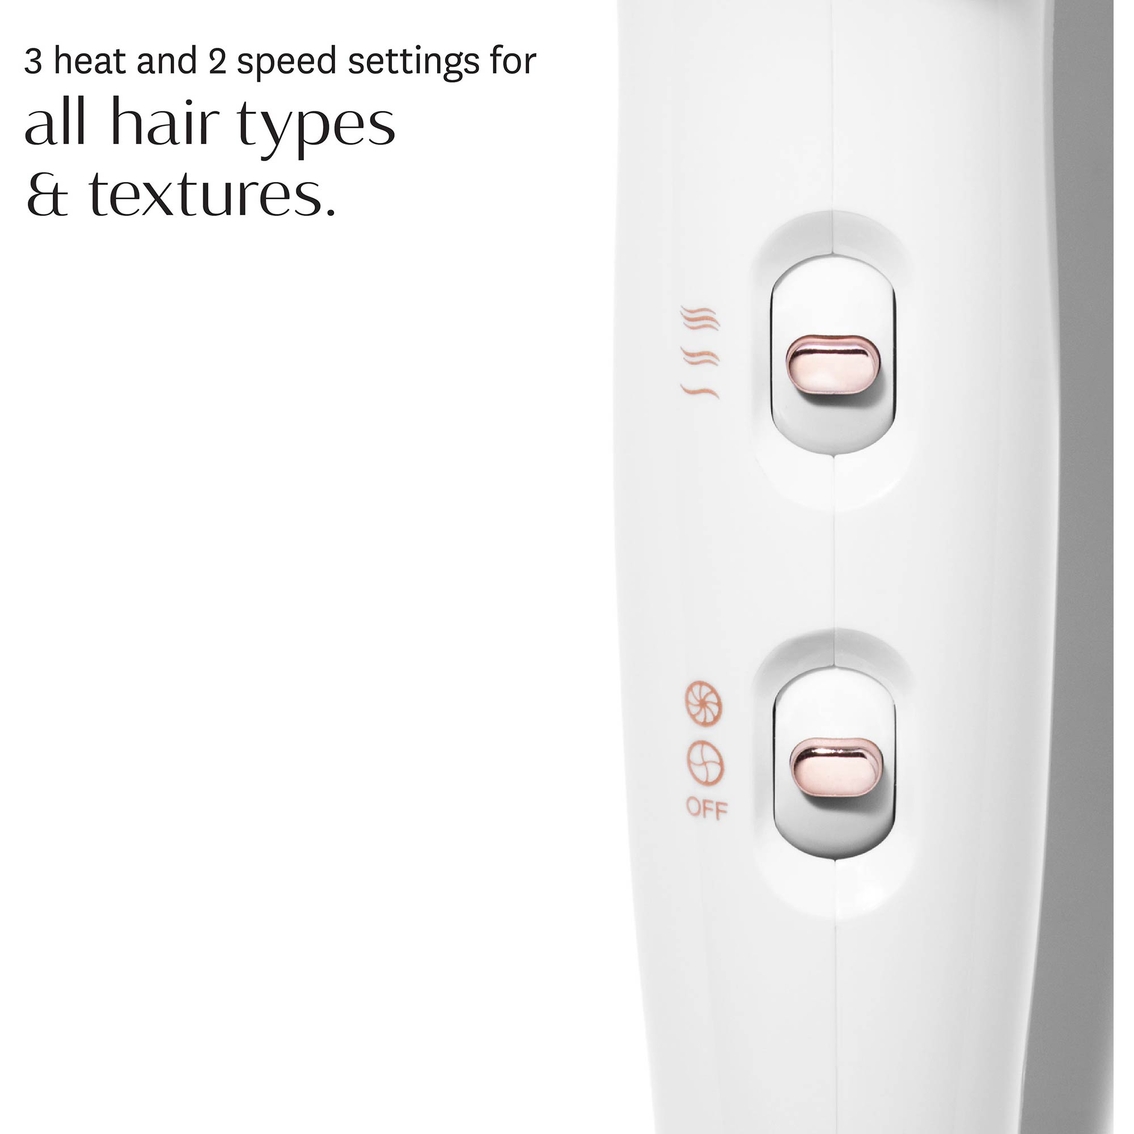 T3 Fit Compact Hair Dryer - Image 2 of 6